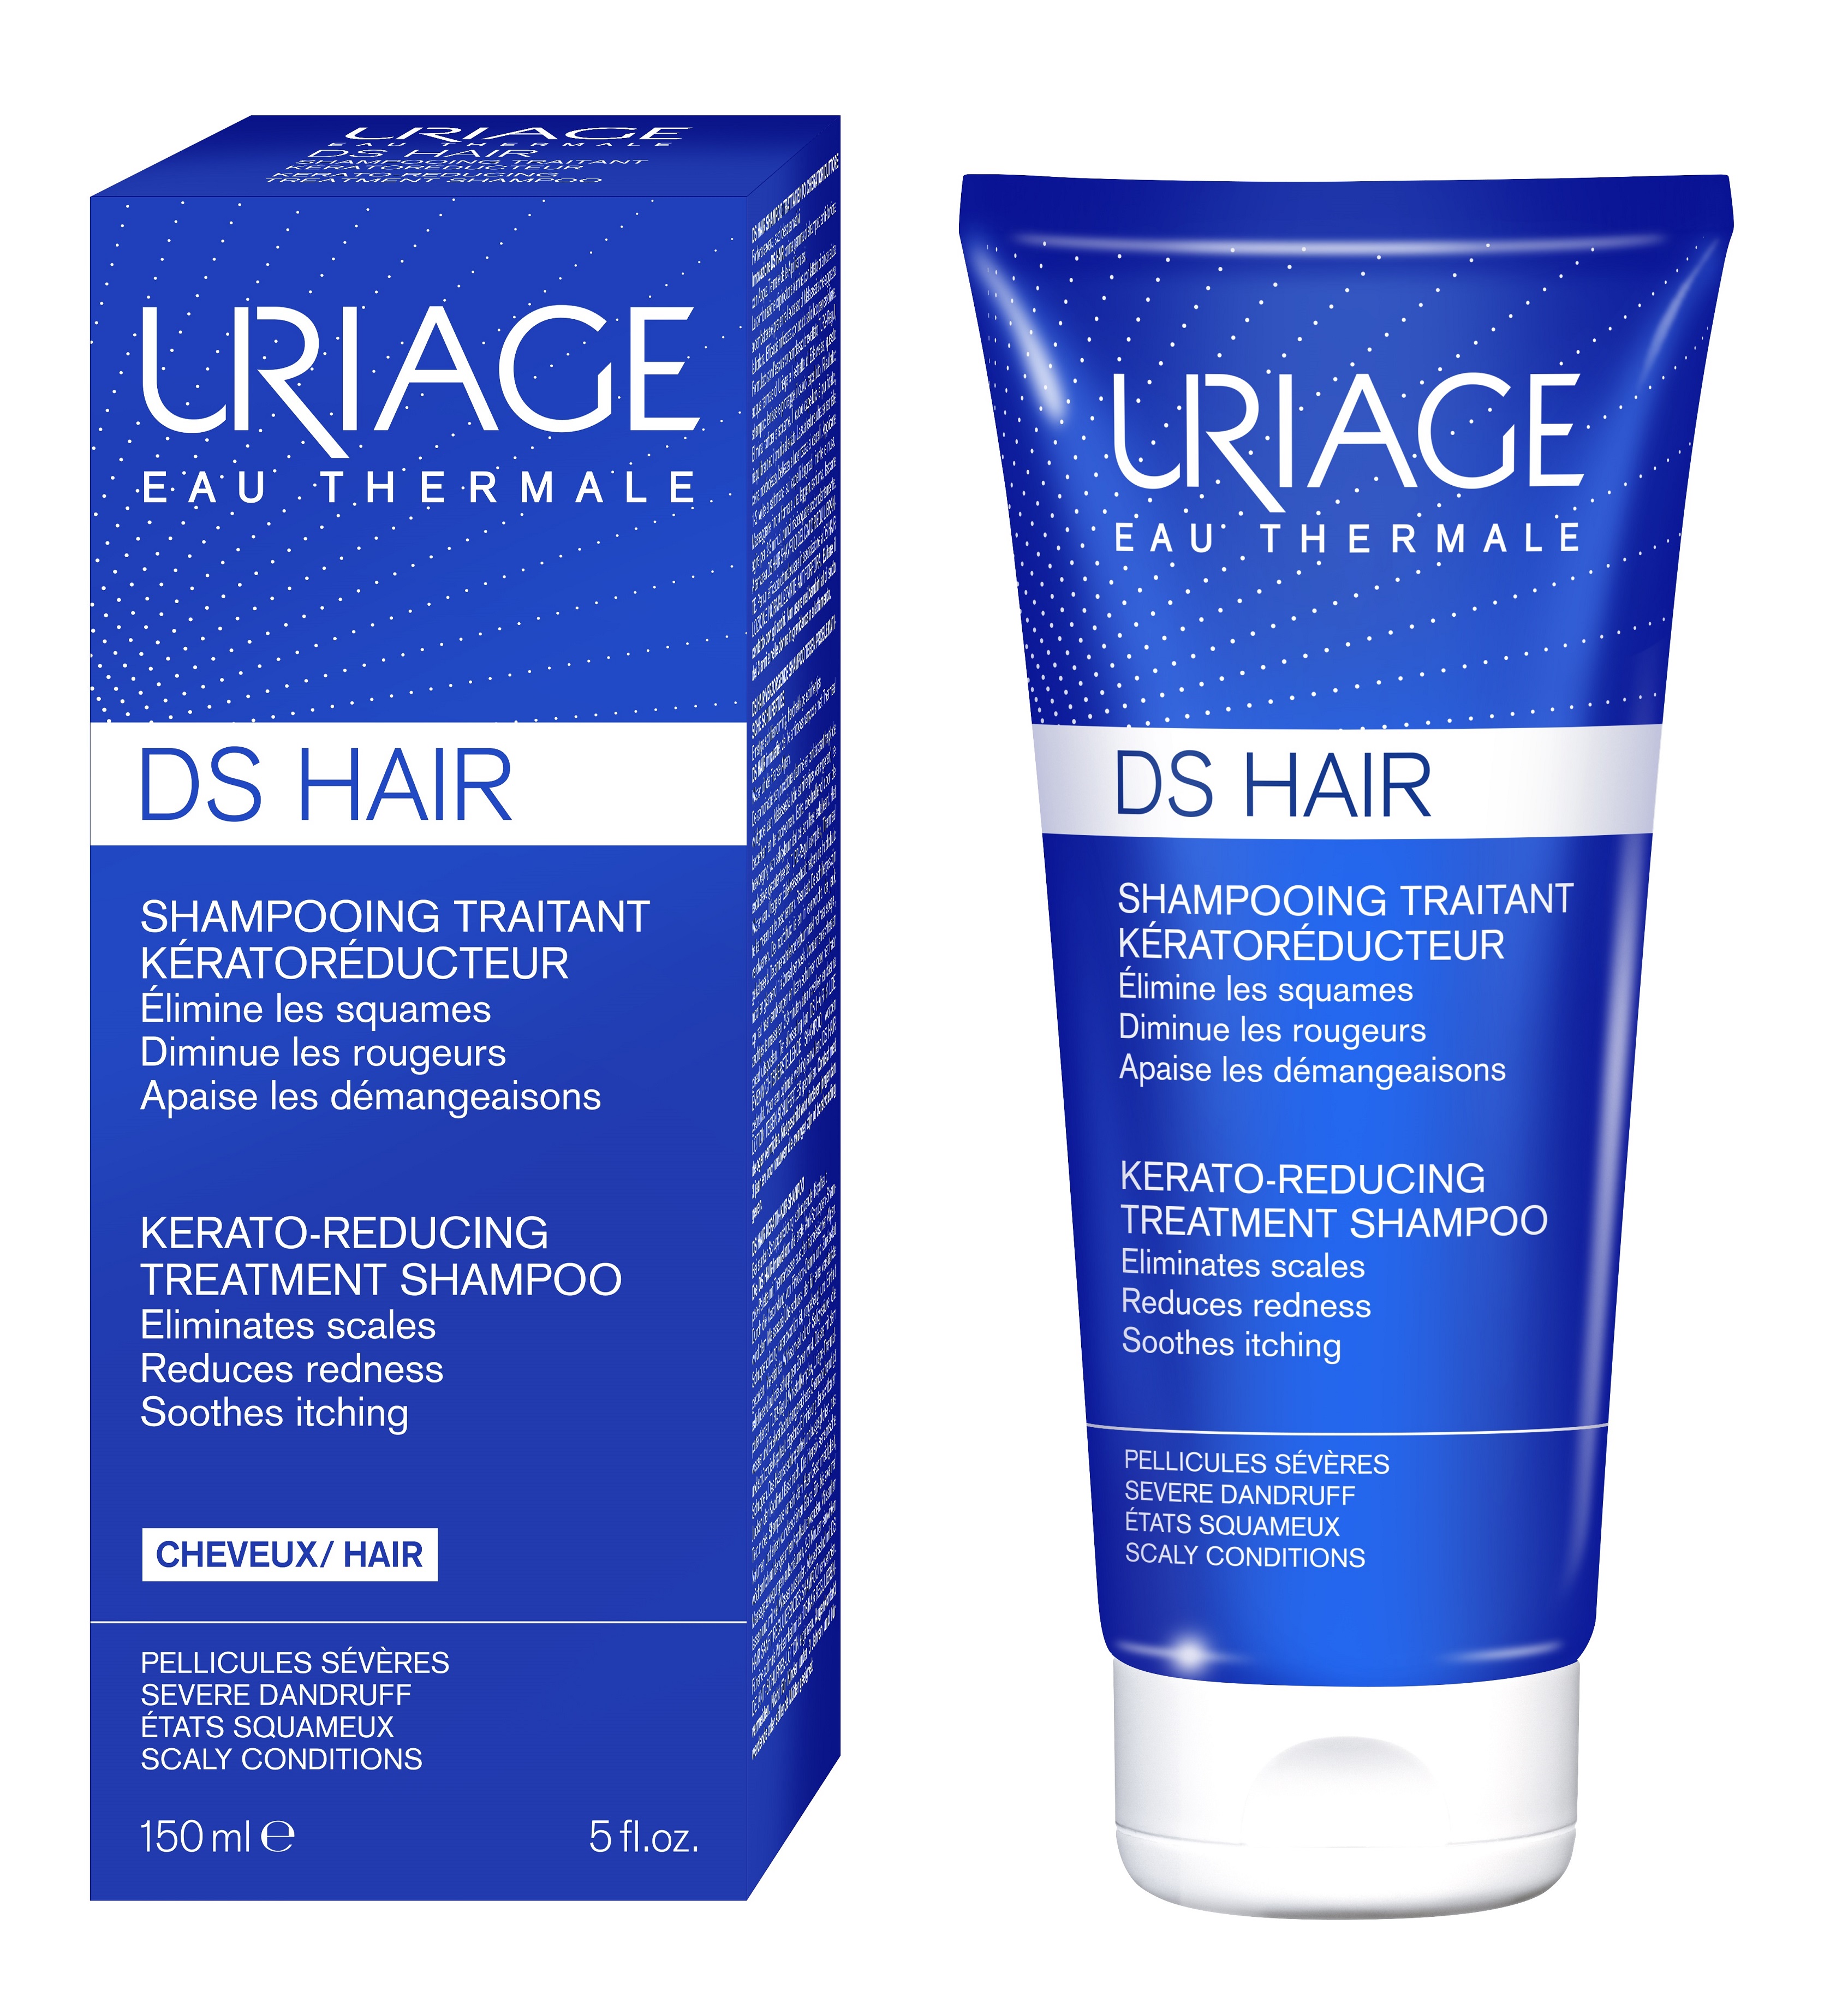 Uriage D.S. HAIR Sampon tratament kerato-reductor 150ml